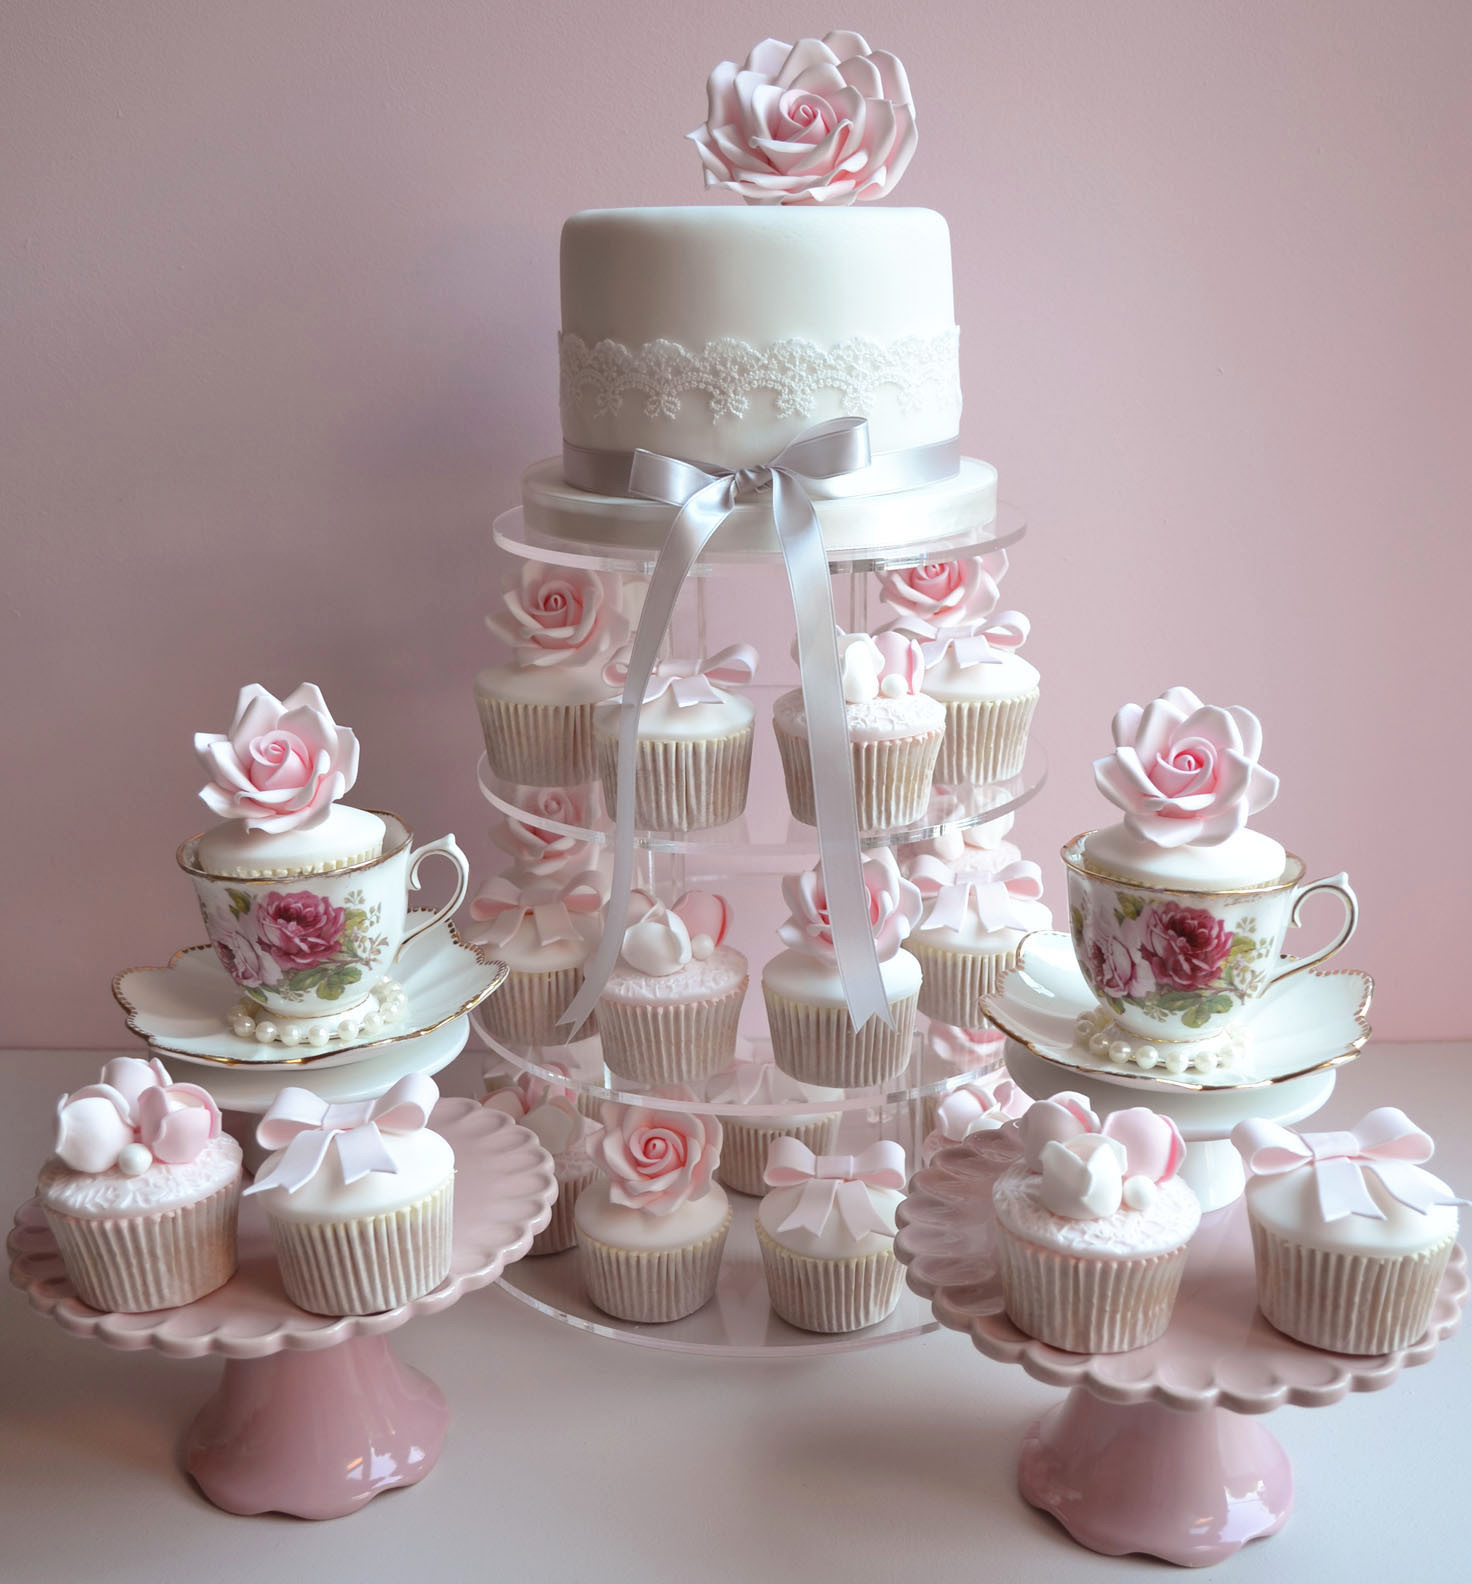 Wedding Cakes And Cupcakes
 Little Paper Cakes Beautiful Vintage Wedding Cupcakes